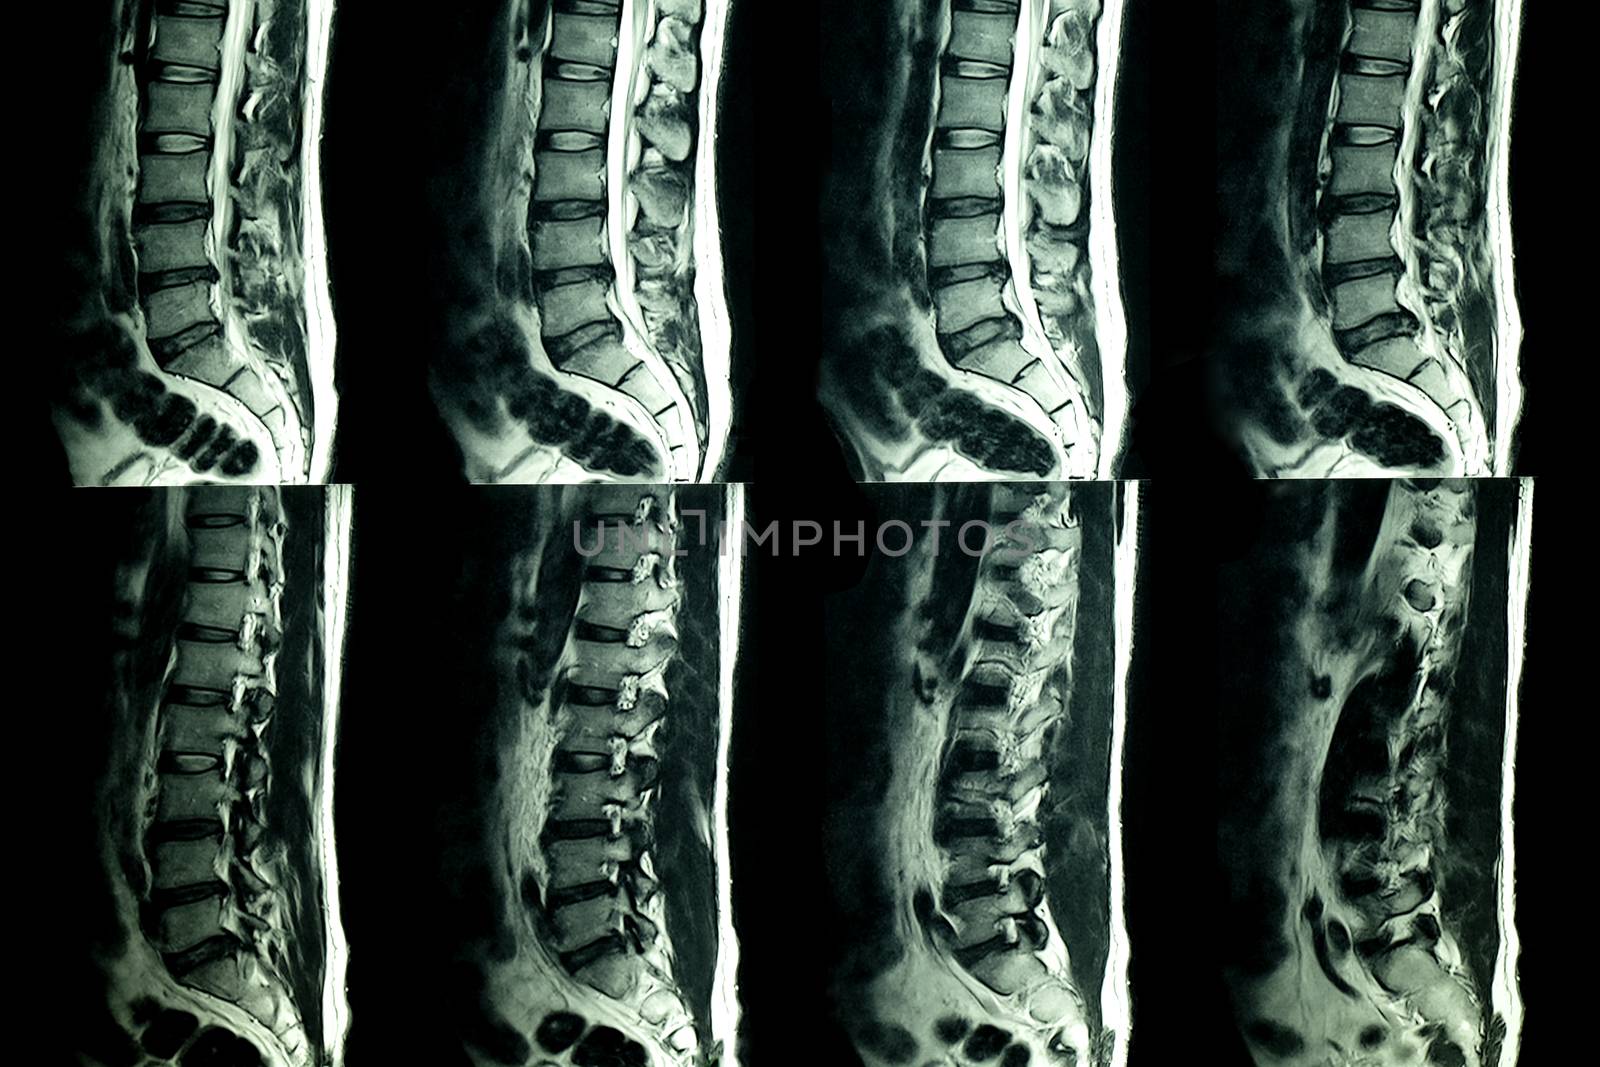 MRI scan of lumbar spines of a patient with chronic back pain showing degenerative change of lumbar and sacral spines with disc dessication and disc space narrowing and central bulging of L3-4 disc